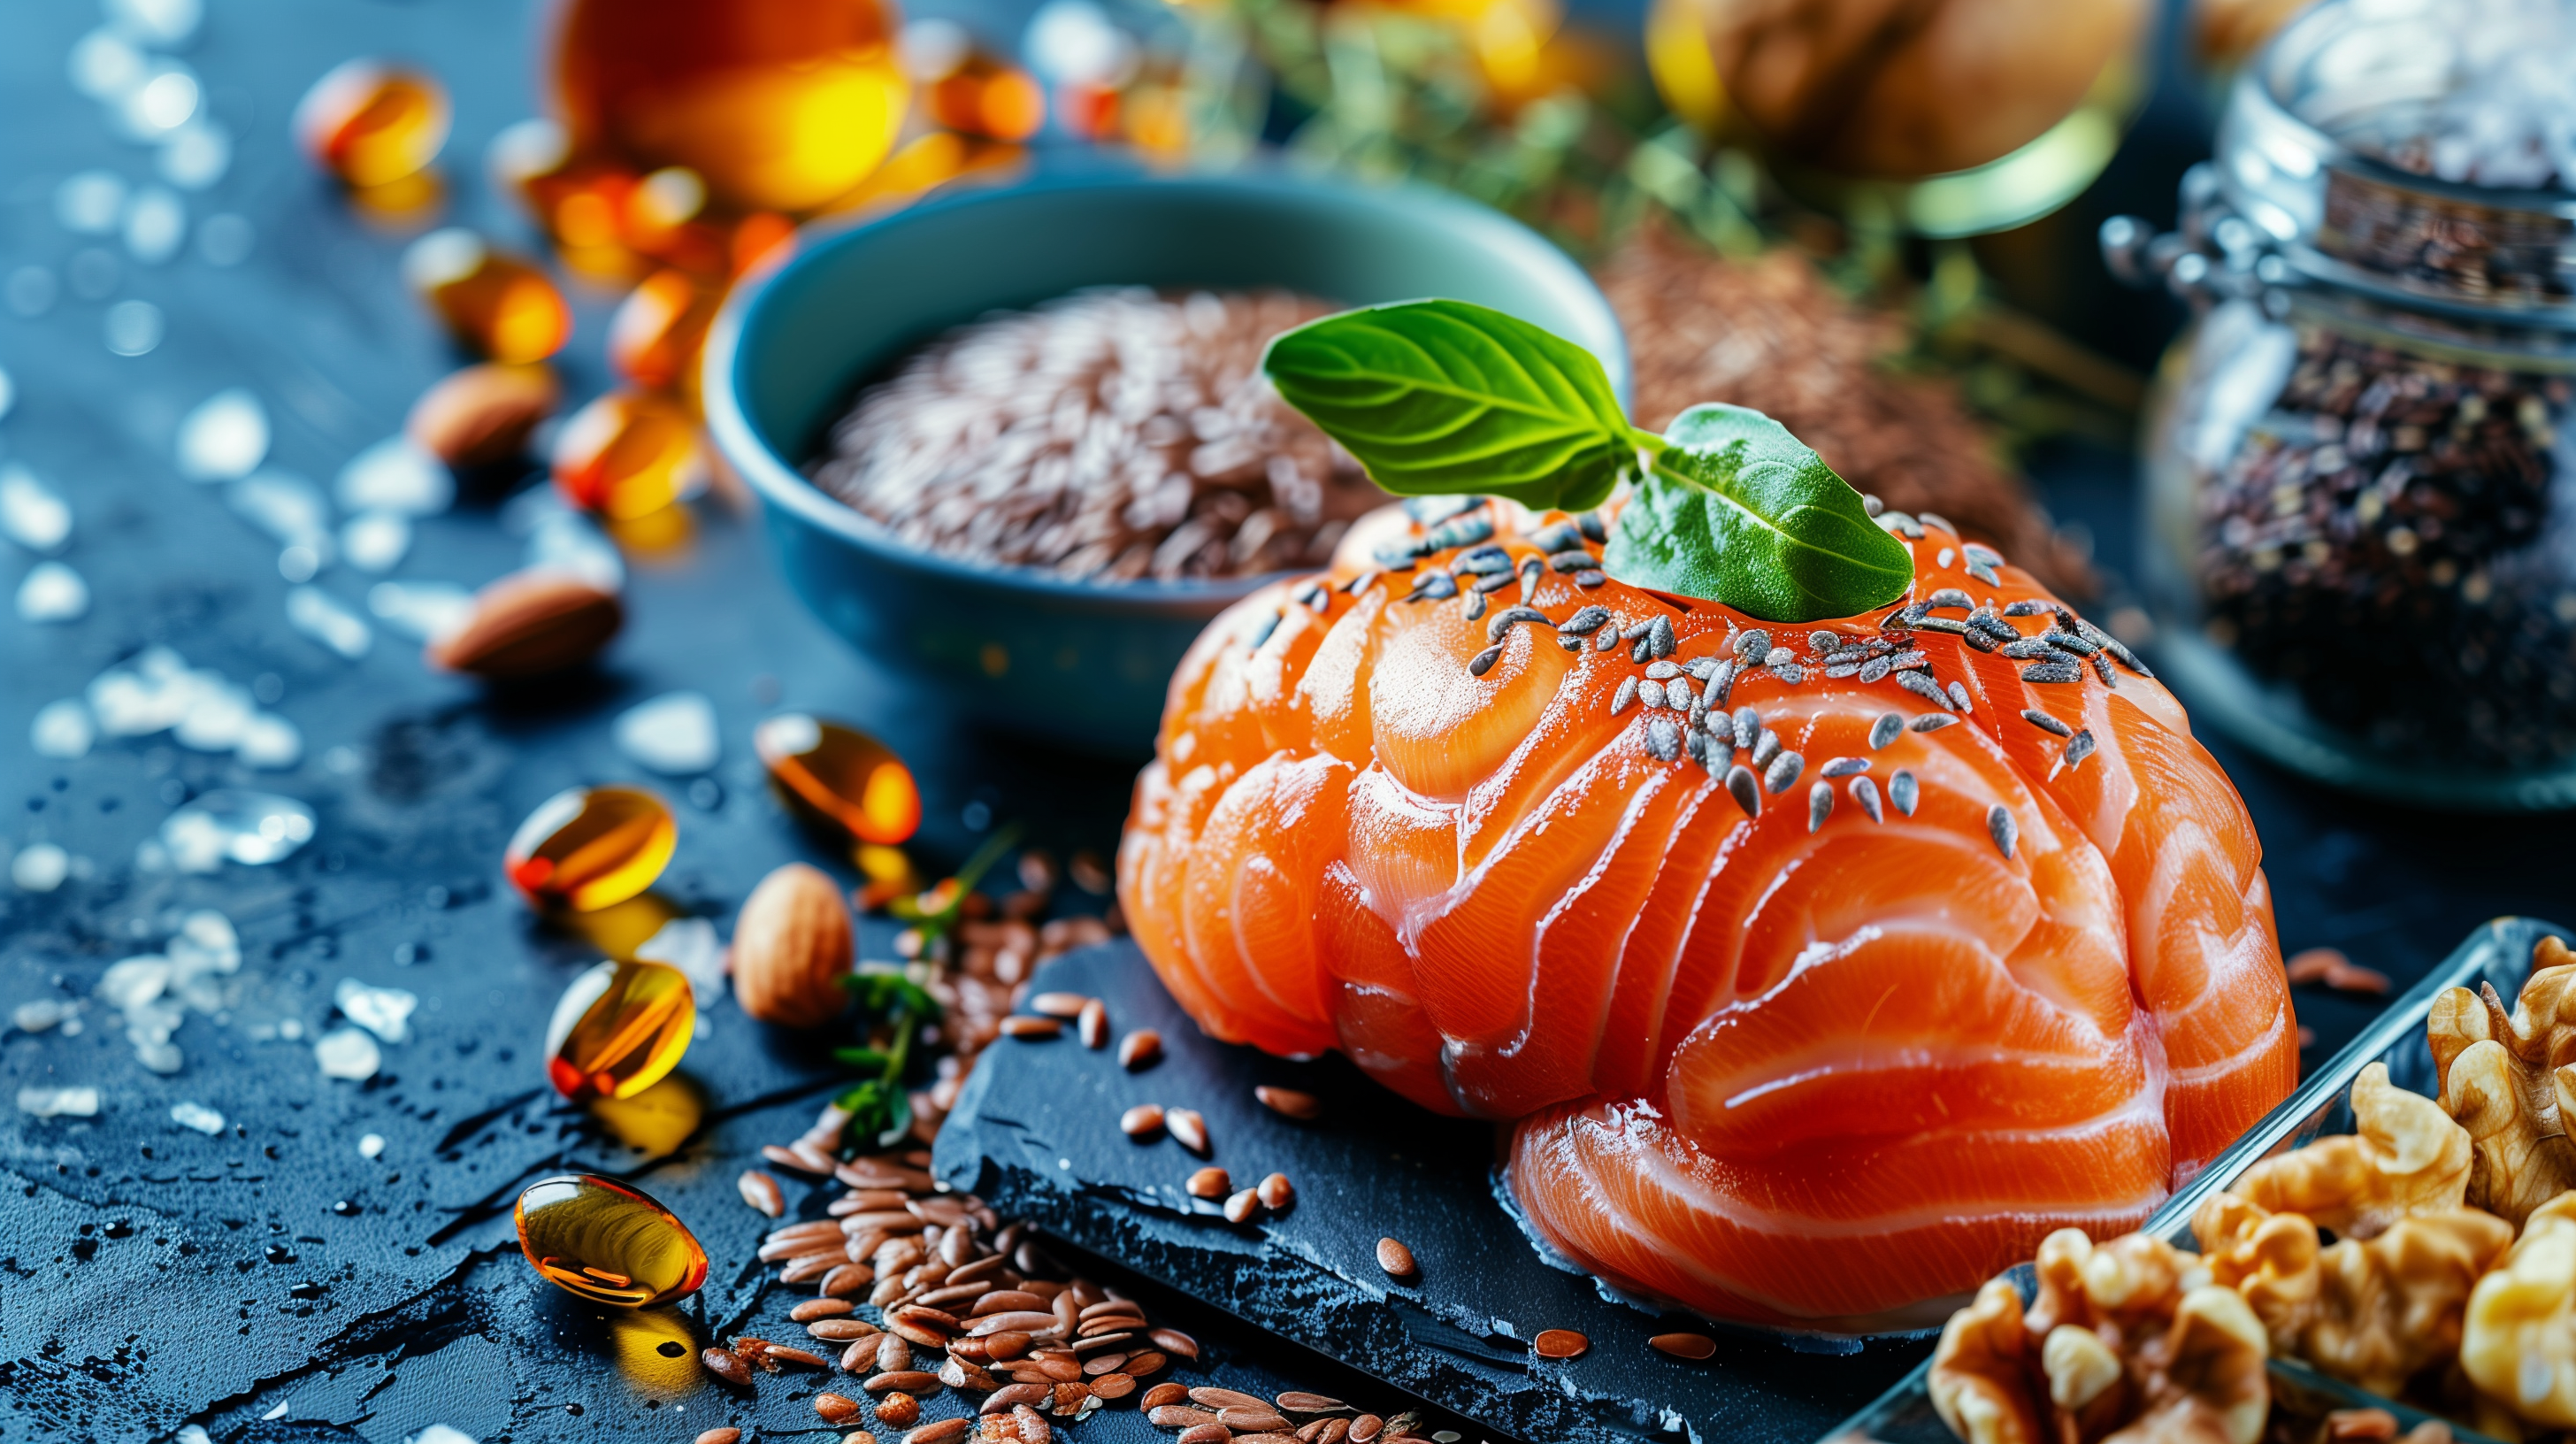 omega-3 rich foods like fish, walnuts, and flaxseeds